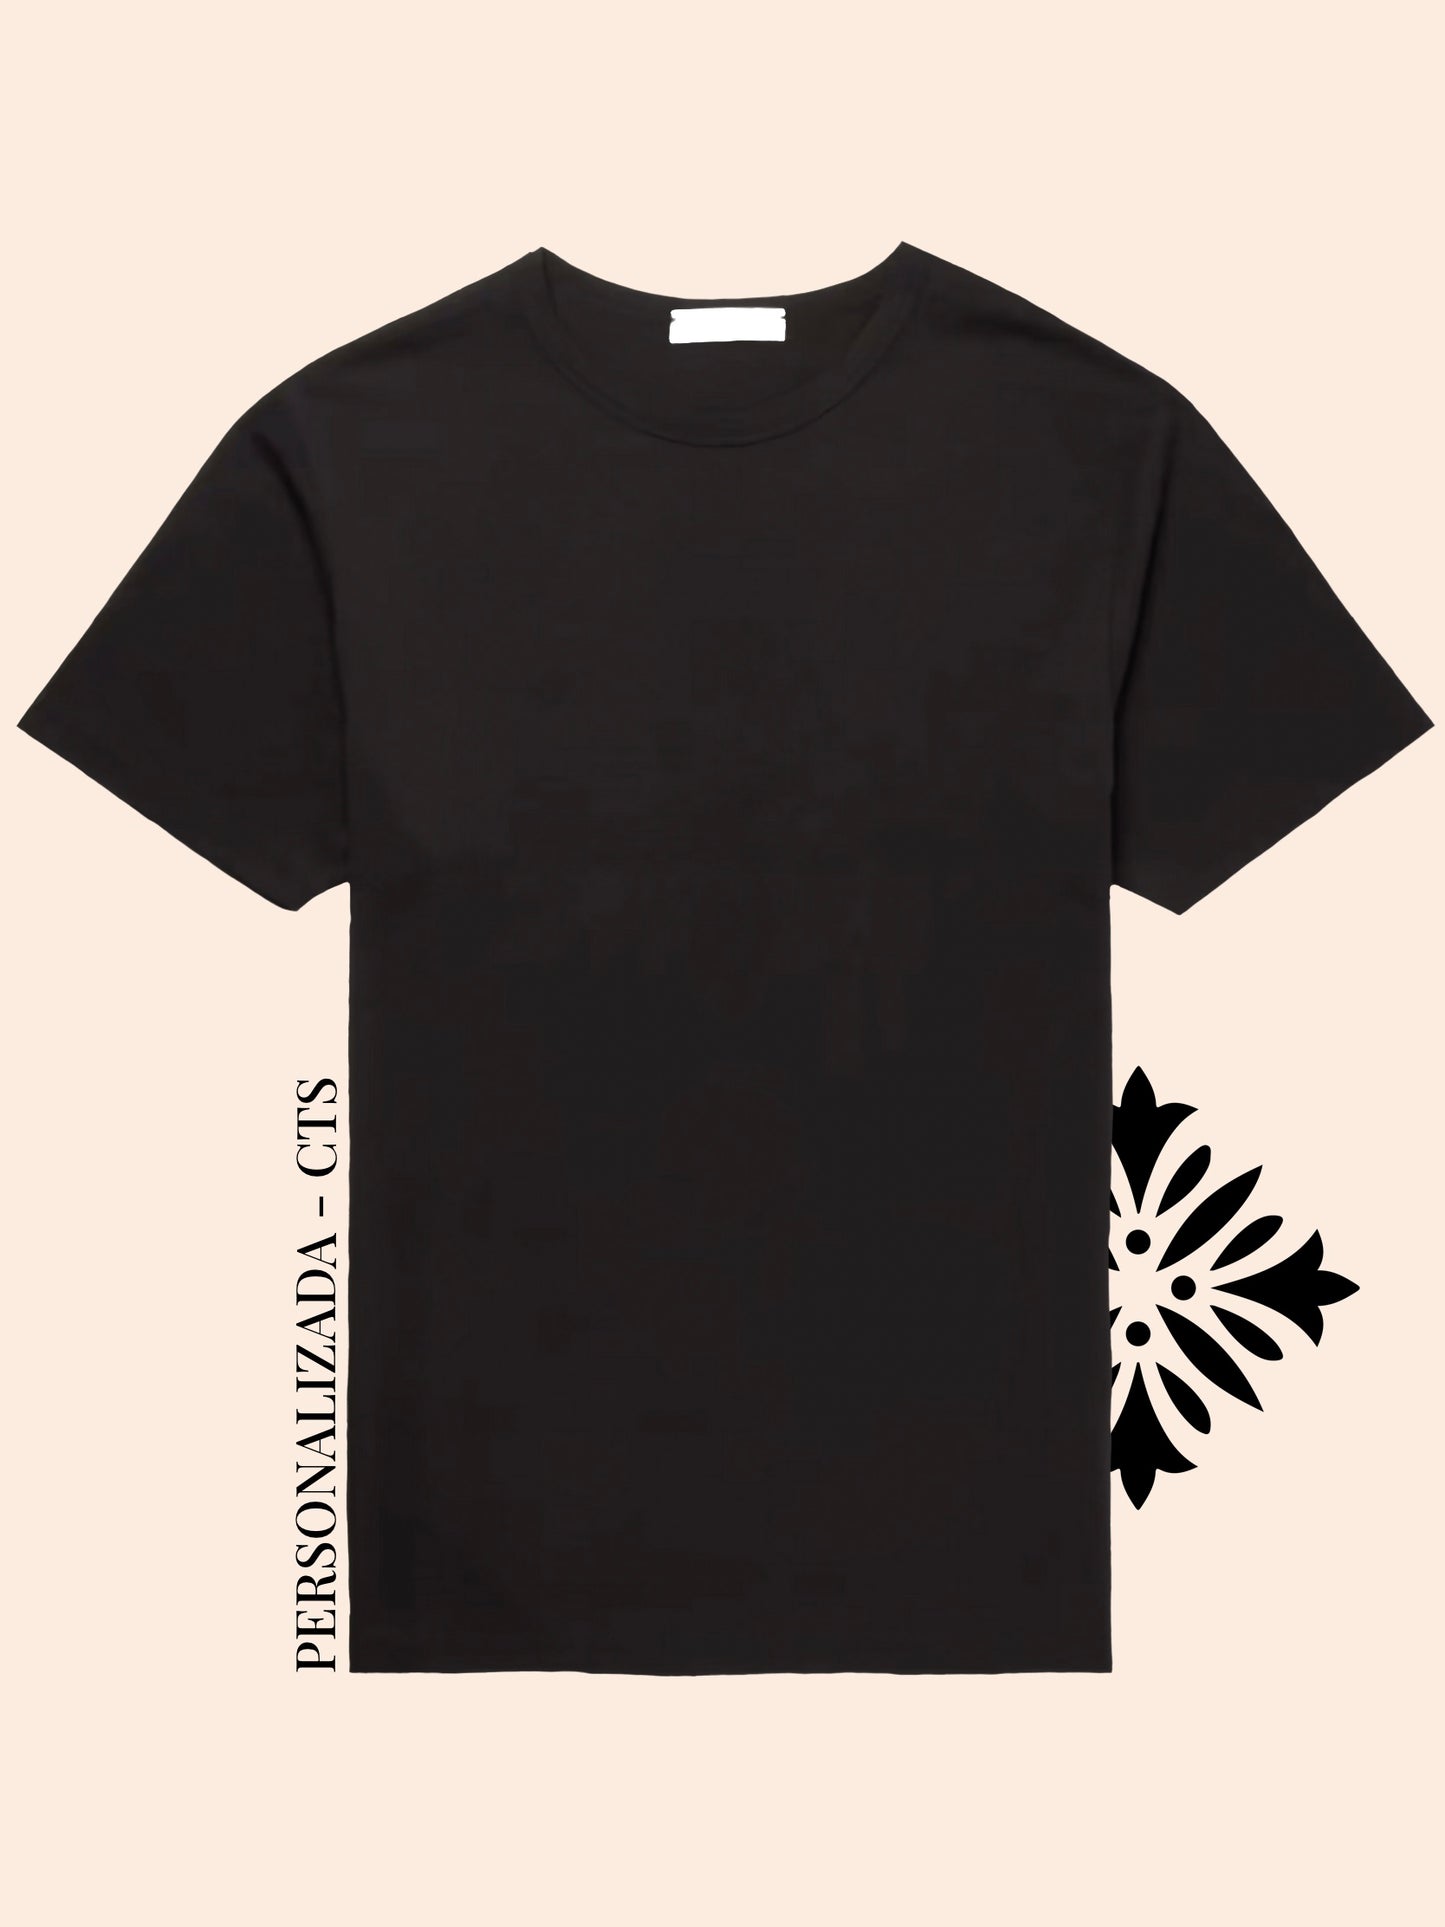 Personalized Black T-shirt - CTS